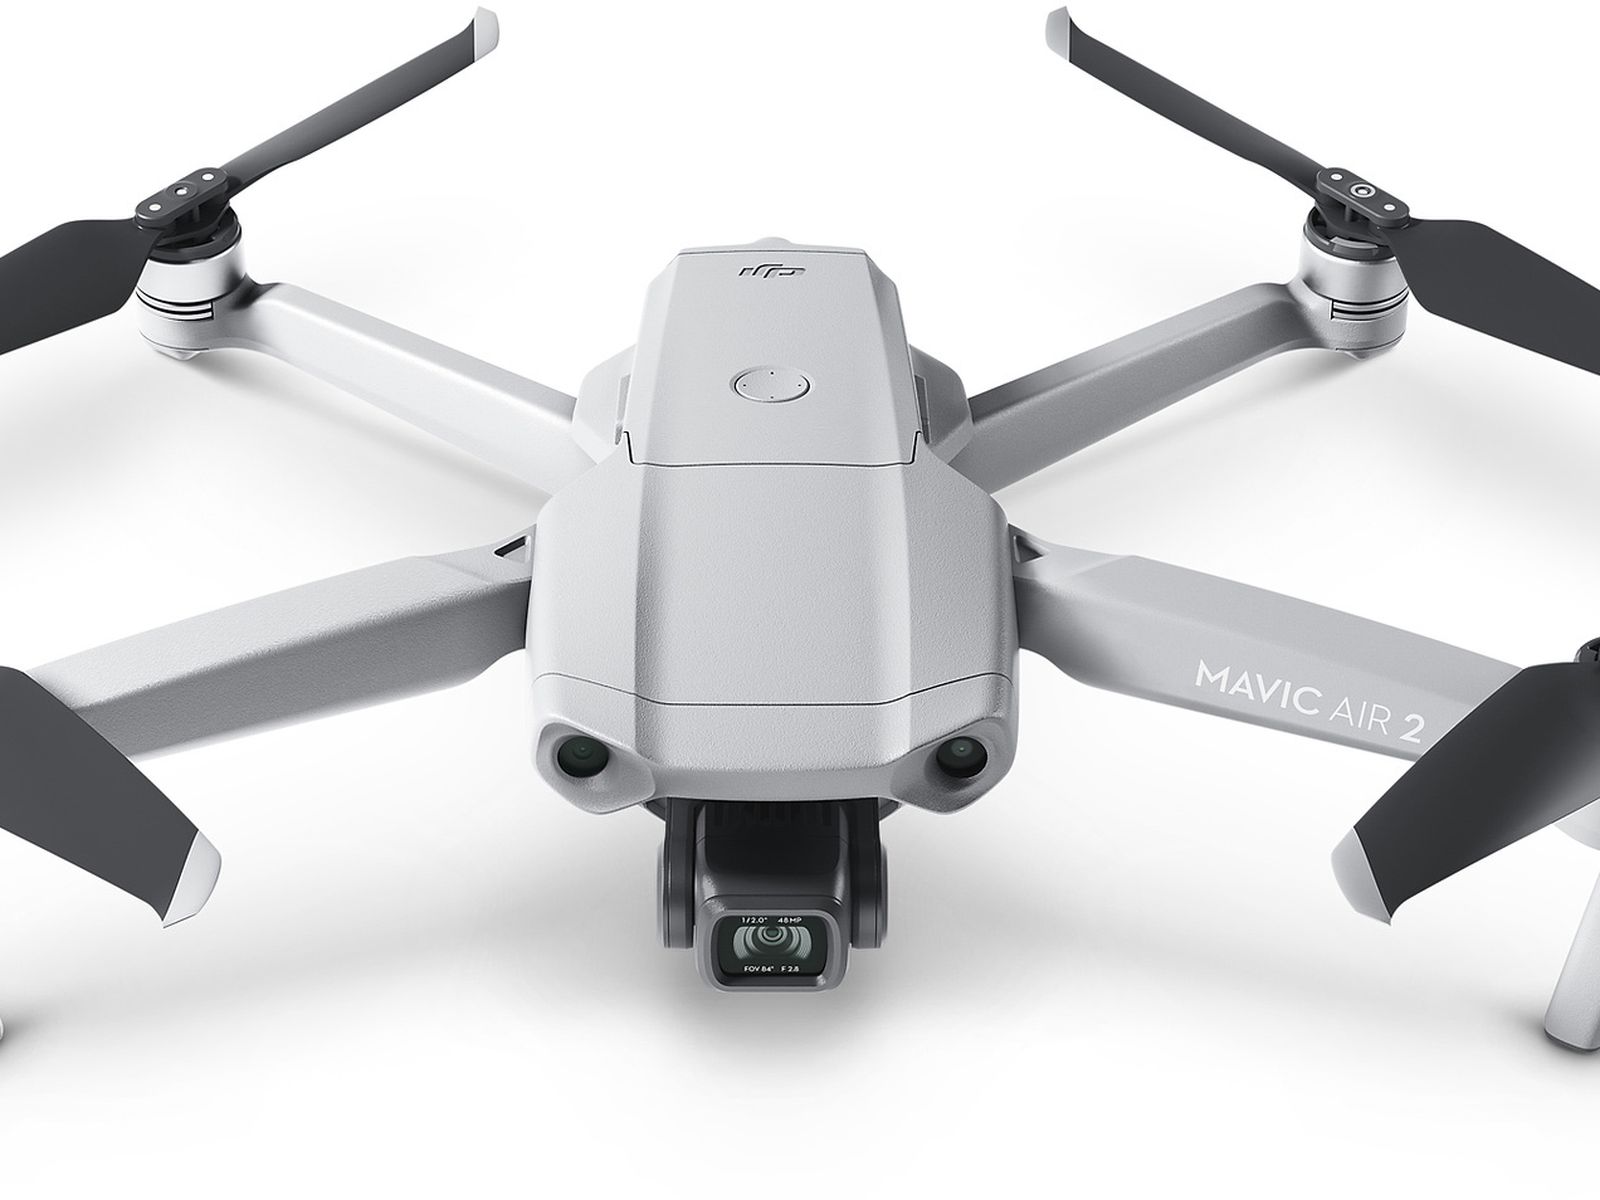 Apple Now Selling DJI's New Mavic Air 2 Drone in Online Store